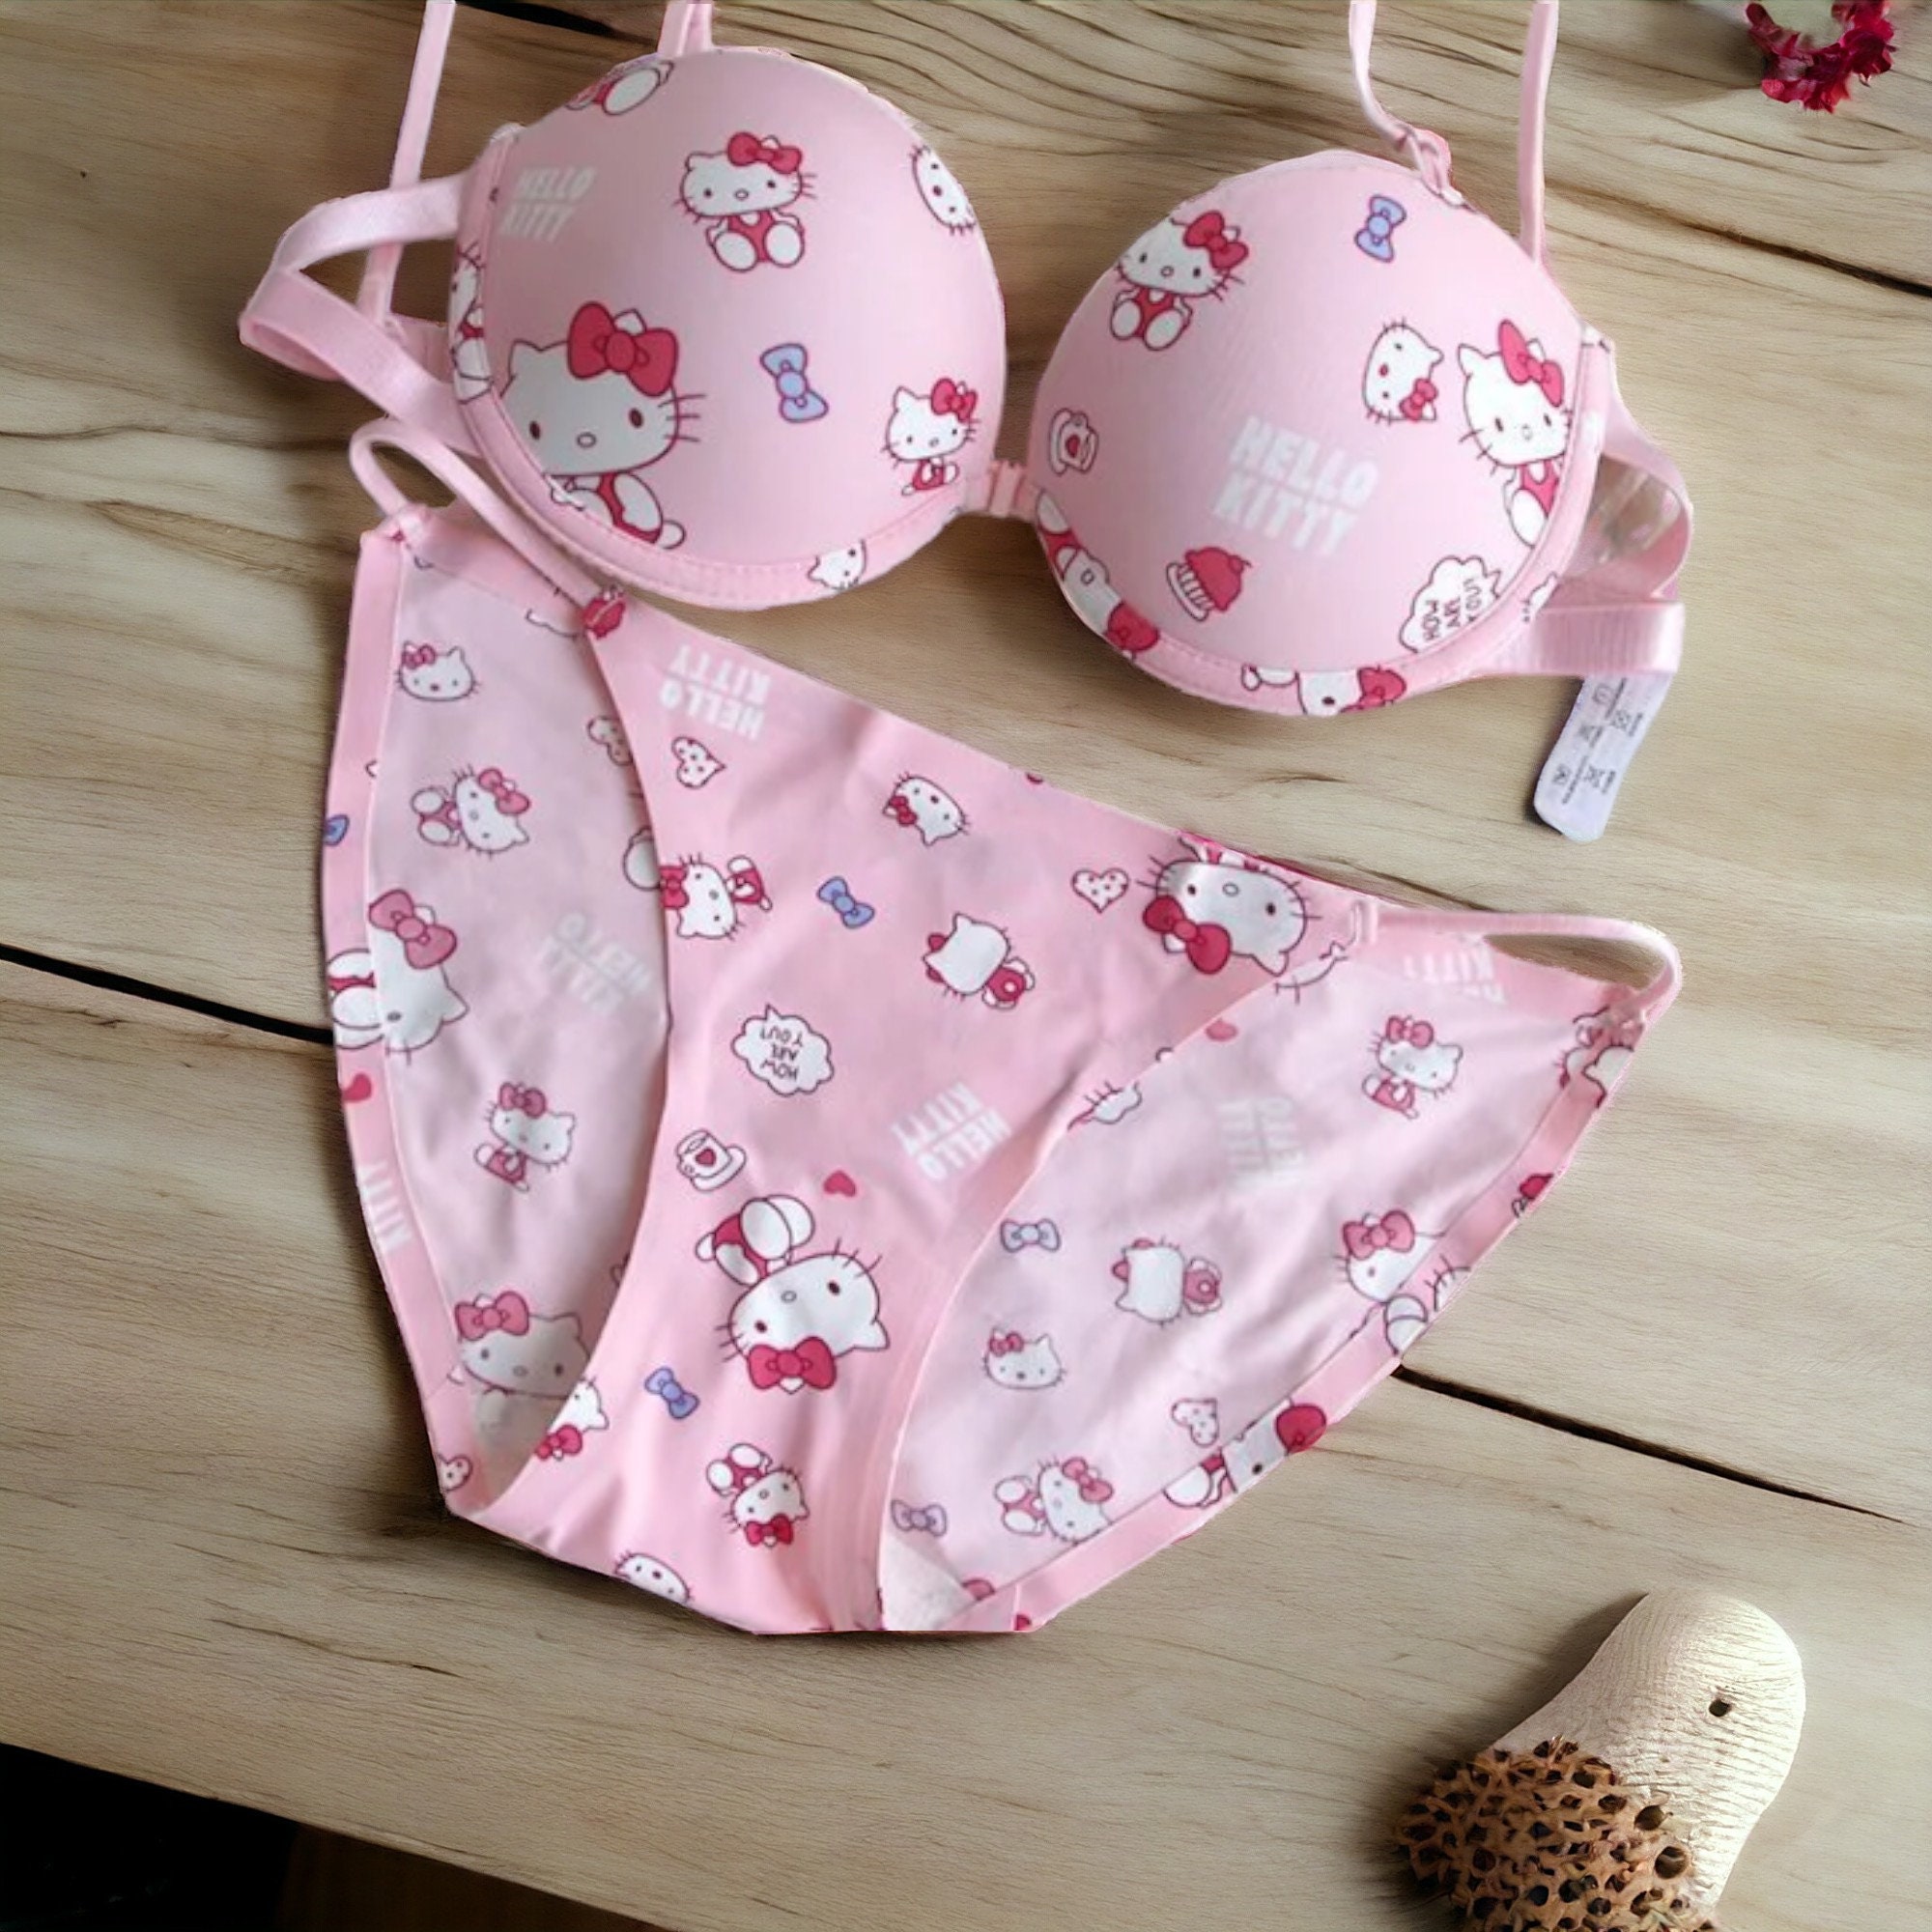 Buy Kitty Lingerie Online In India -  India